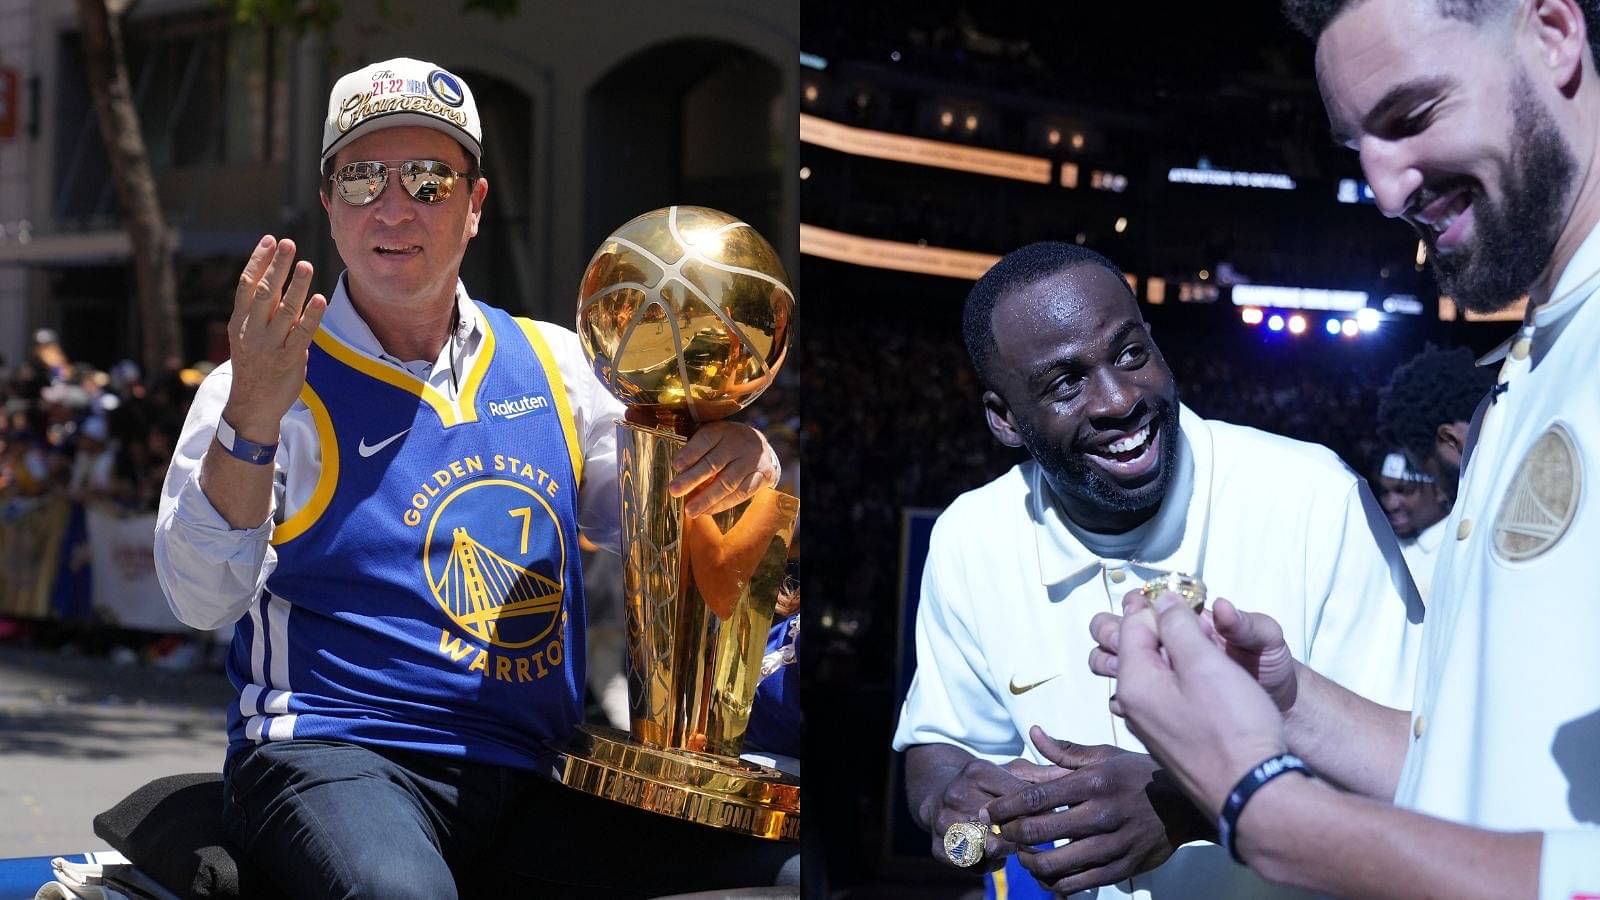 “Draymond Green Earned This Ring Ceremony, I Wouldn’t Take That Away From Him”: Warriors’ Owner Joe Lacob Speaks on Not Suspending Their 4x Champion Forward